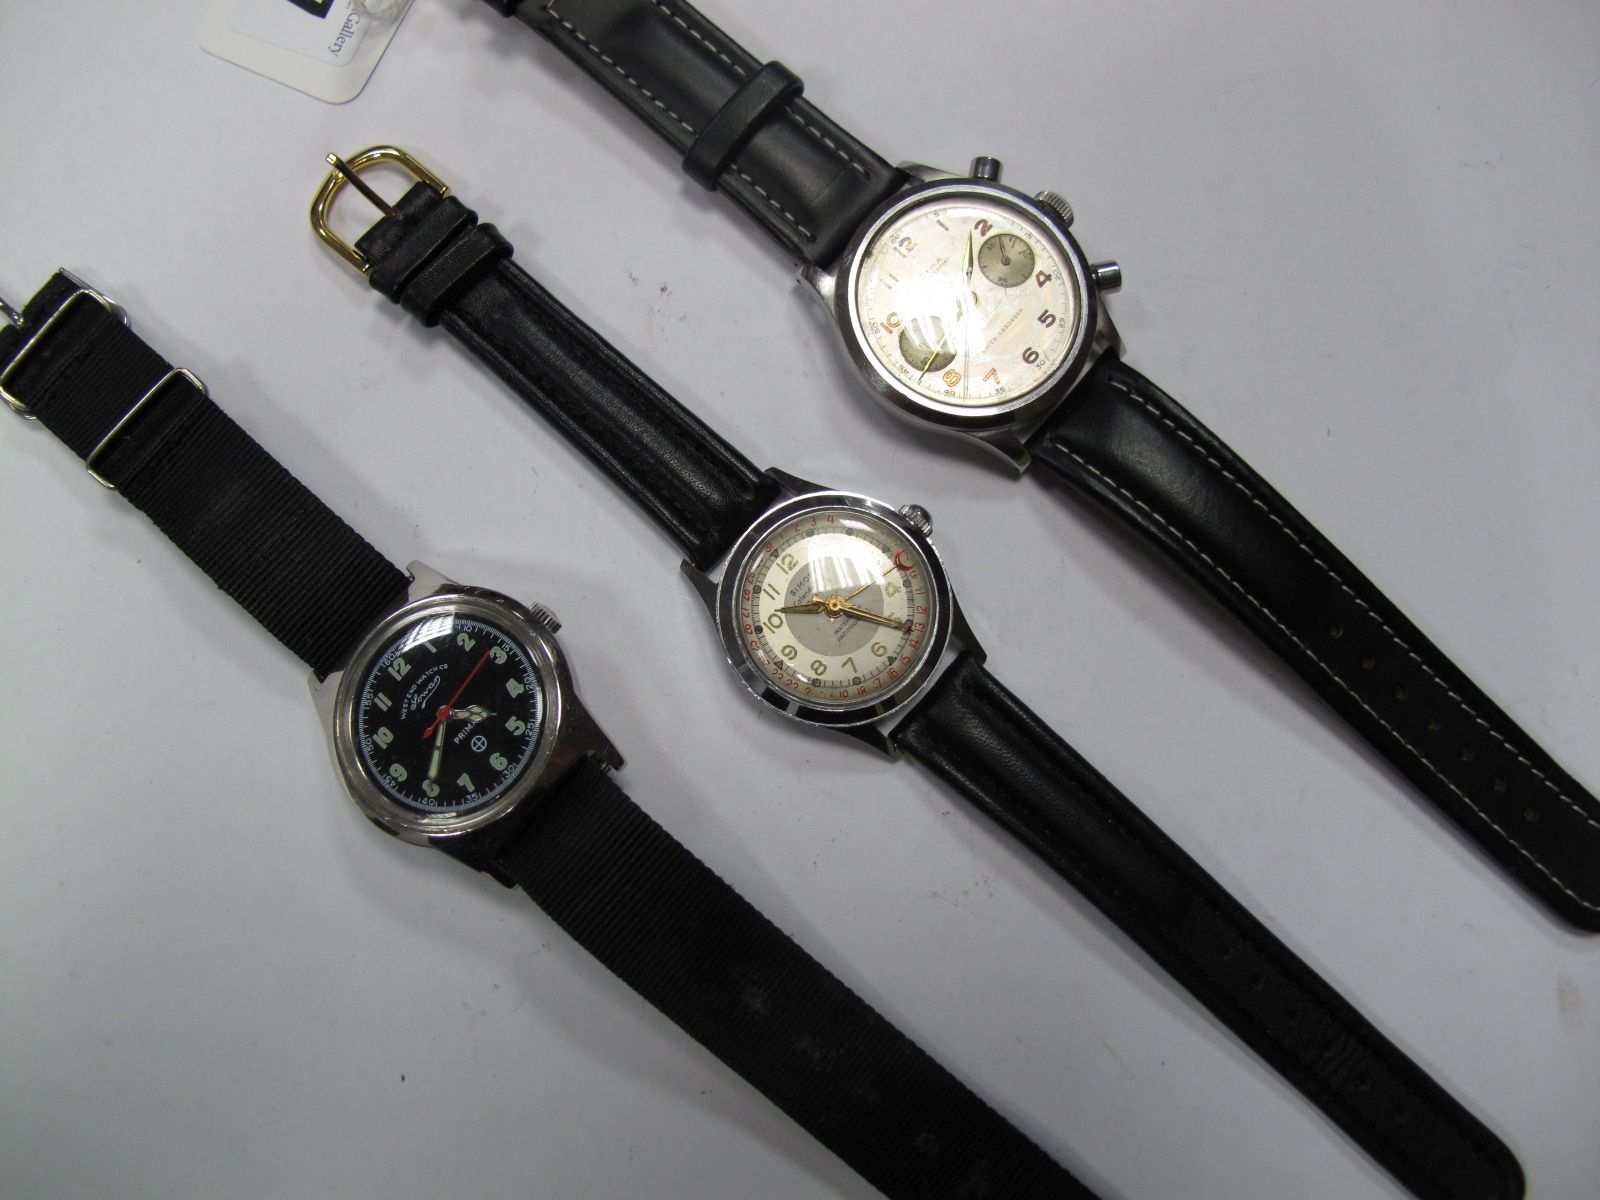 Cyma Watersport, West End Watch Co Sowar and Simonat Calendographe Gent's Wristwatches. (3)